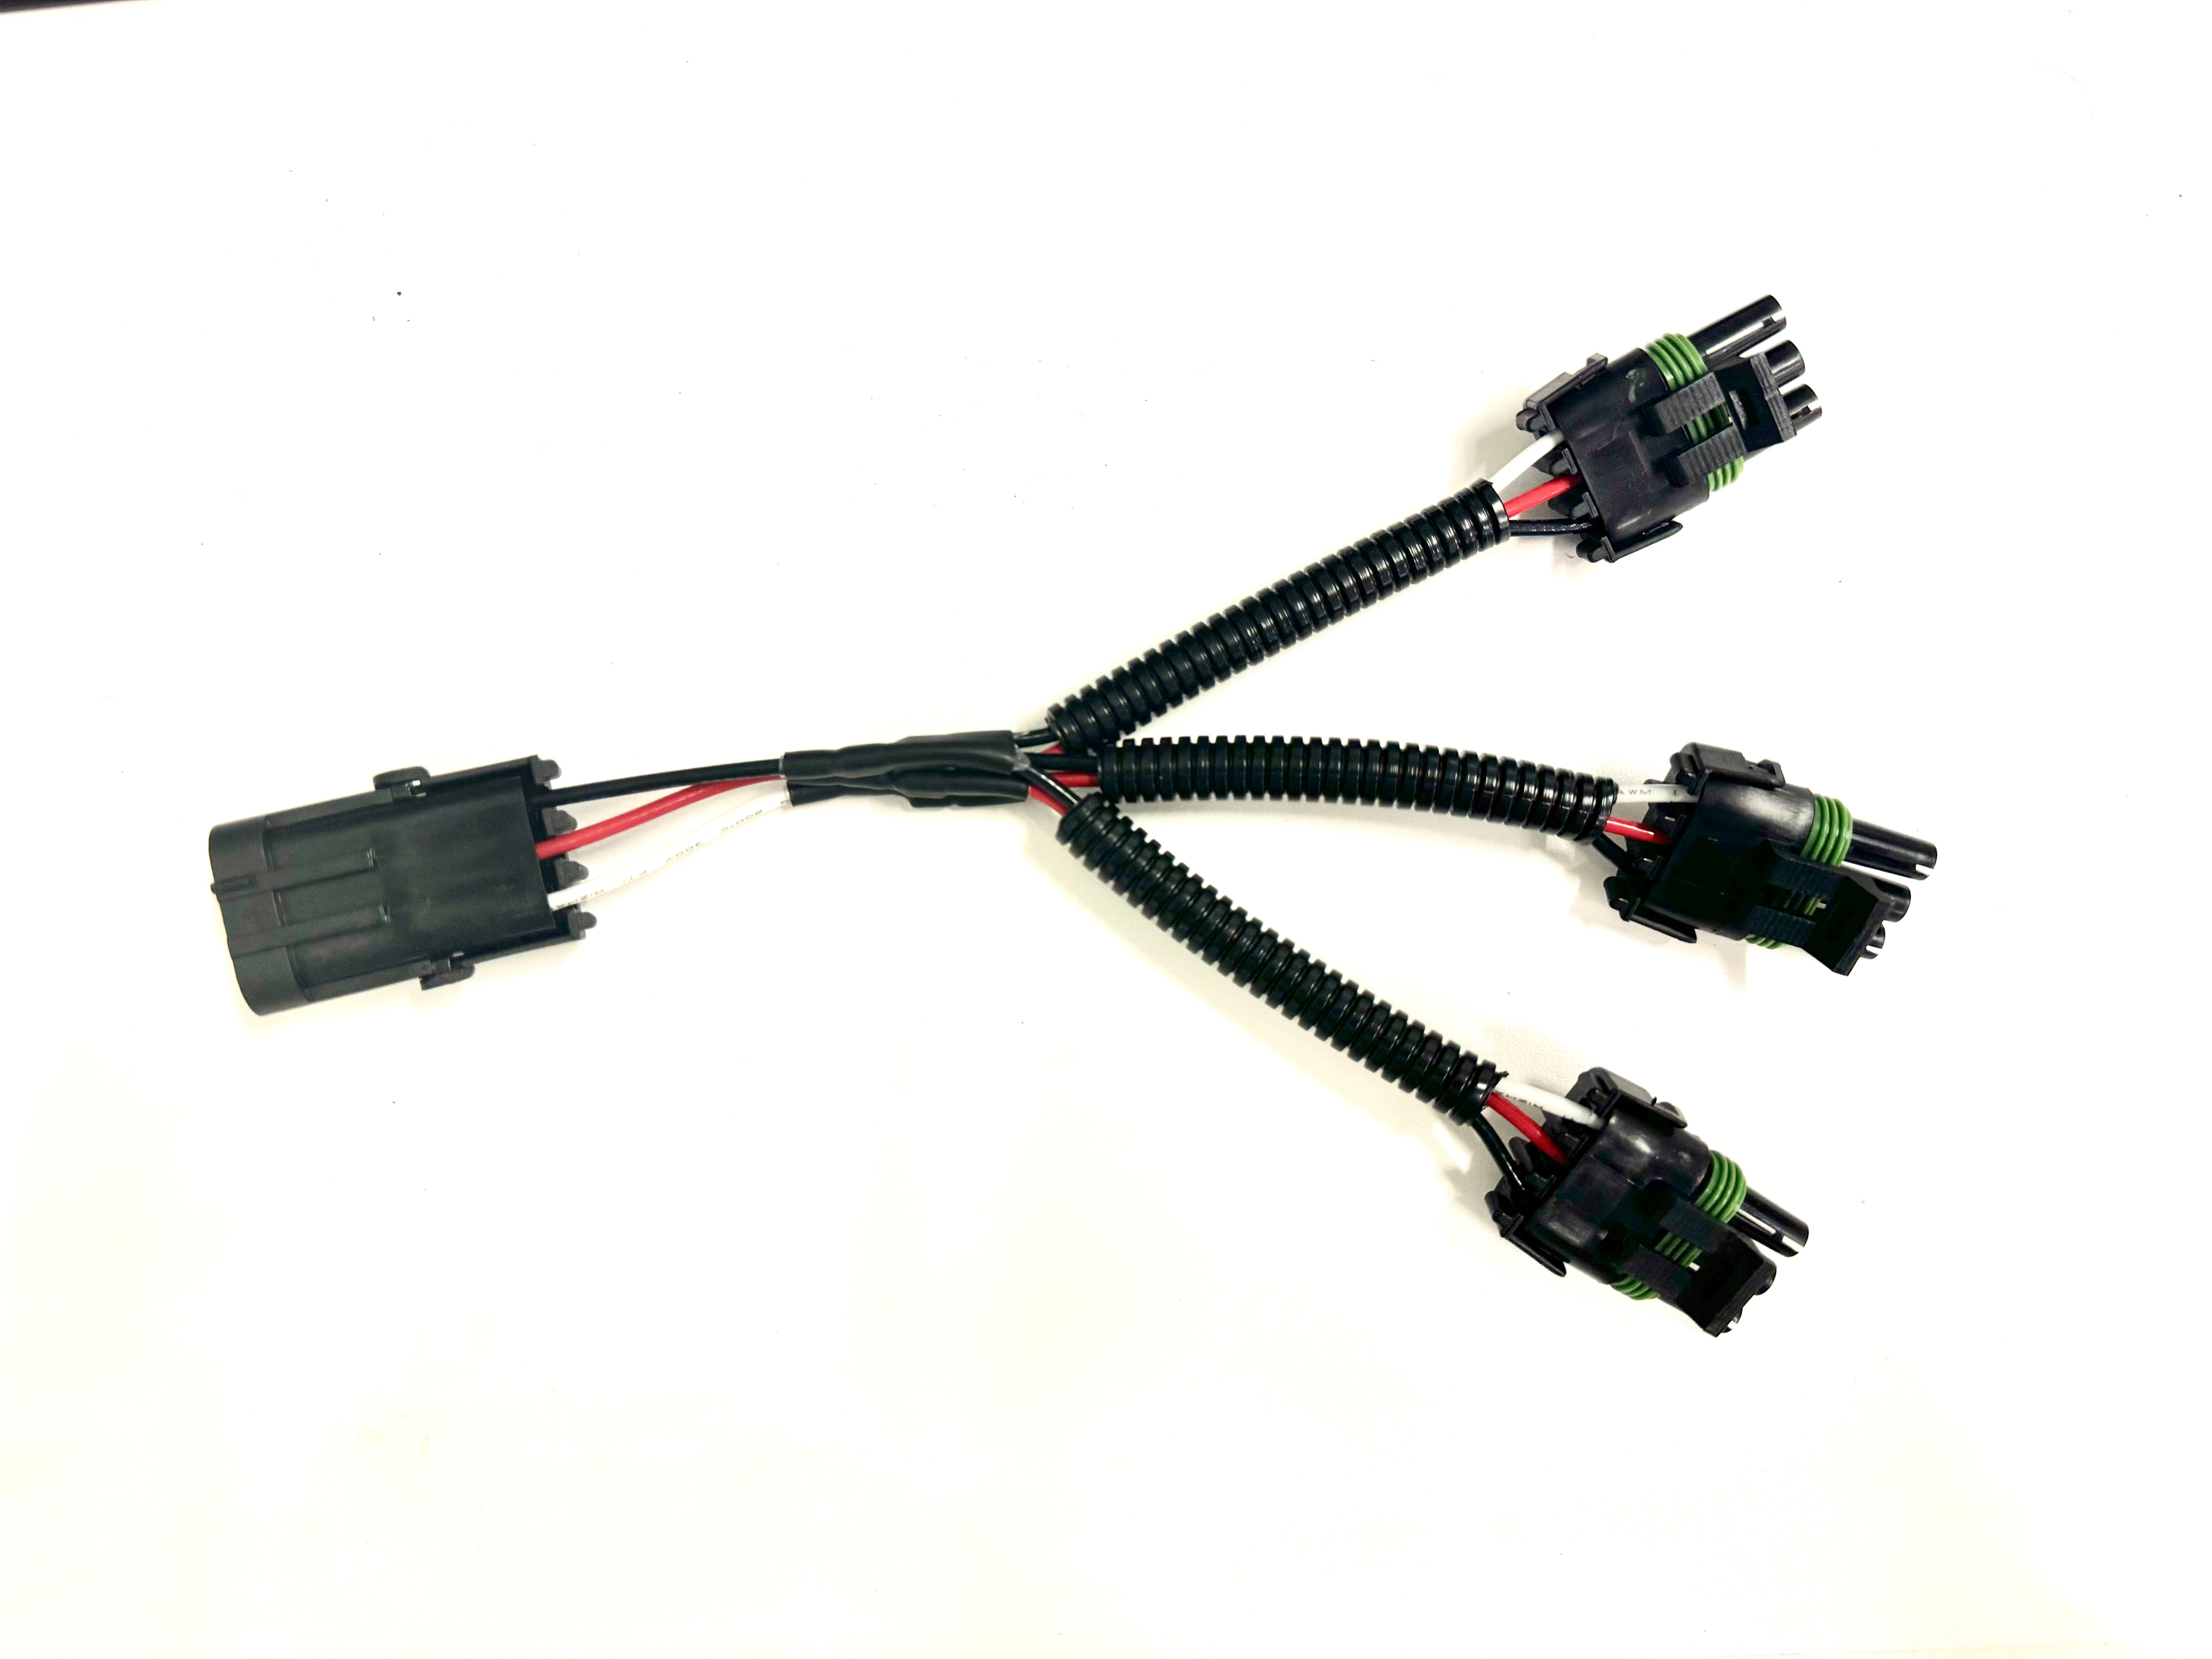 SPV Parts 3 Way HARNESS Splitter with 3 Pole WP Connectors (Single) - SPV Harness System (Works with MANY vehicles, See Details)